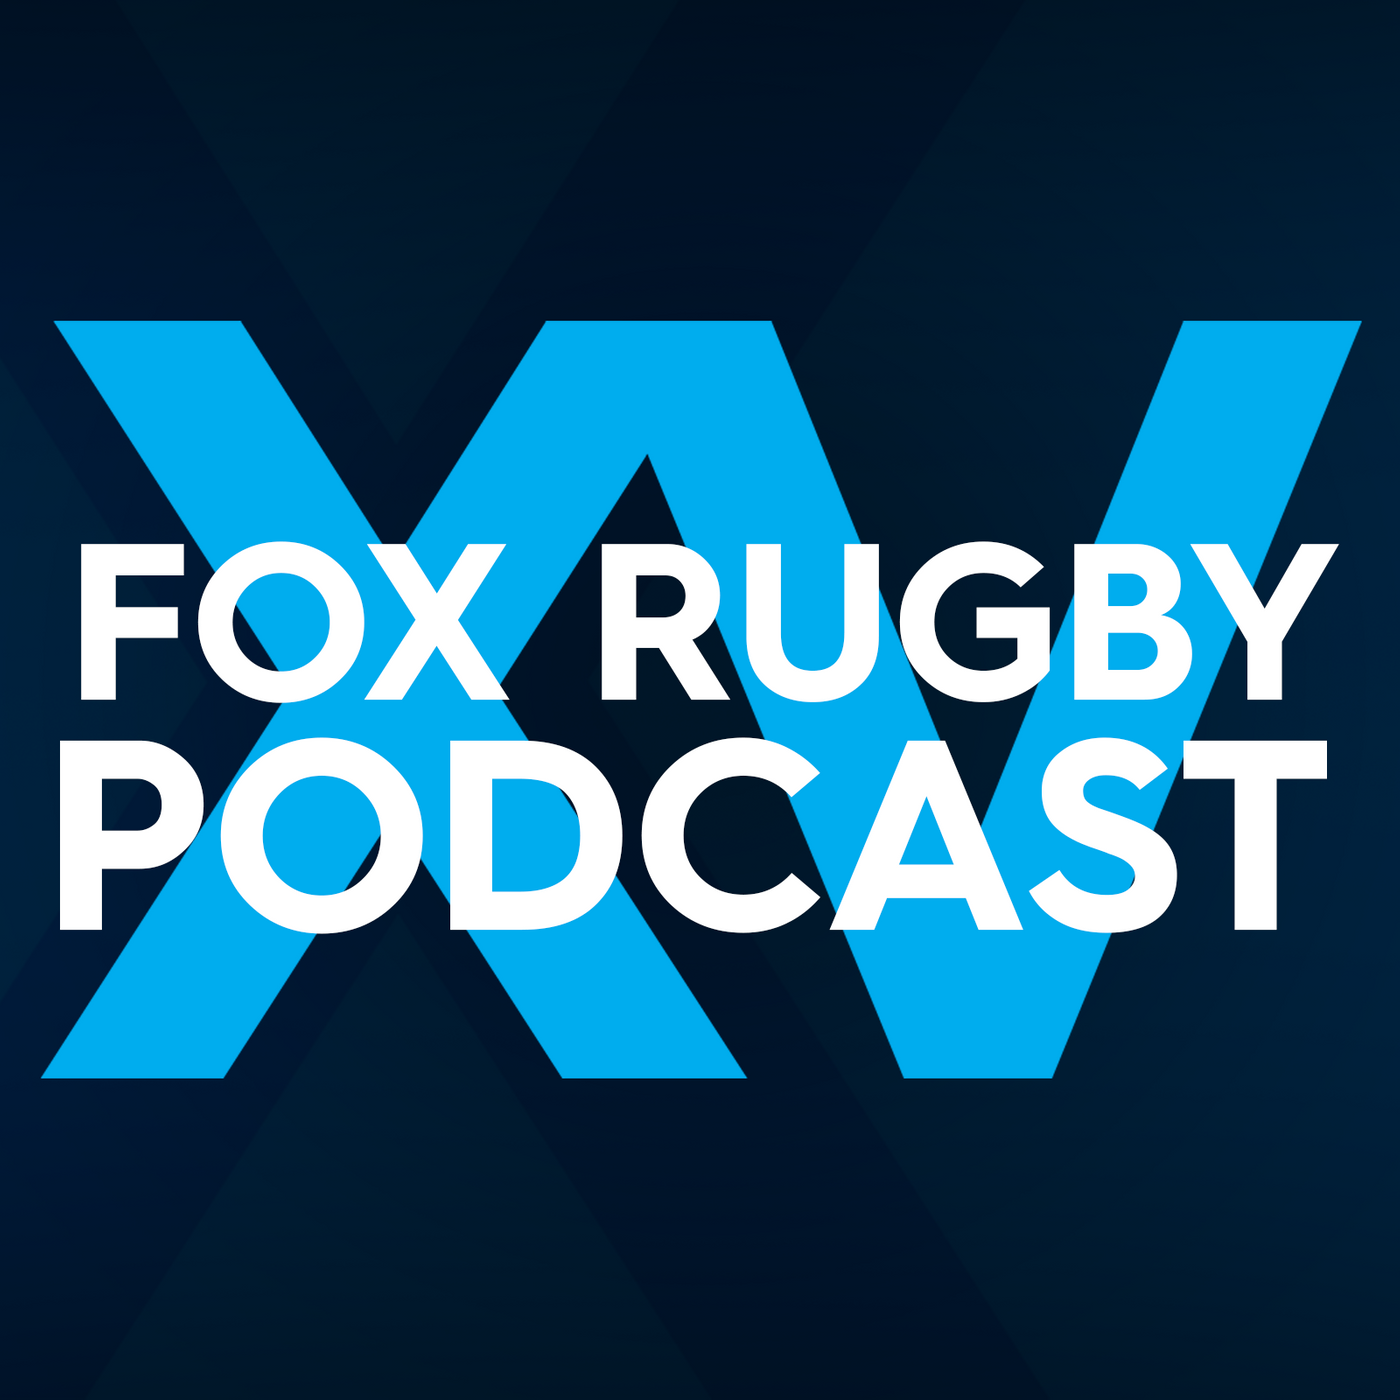 Scott Higginbotham & Kafer | 'Where's the respect?' - the Israel issue | Wallabies' WC chances